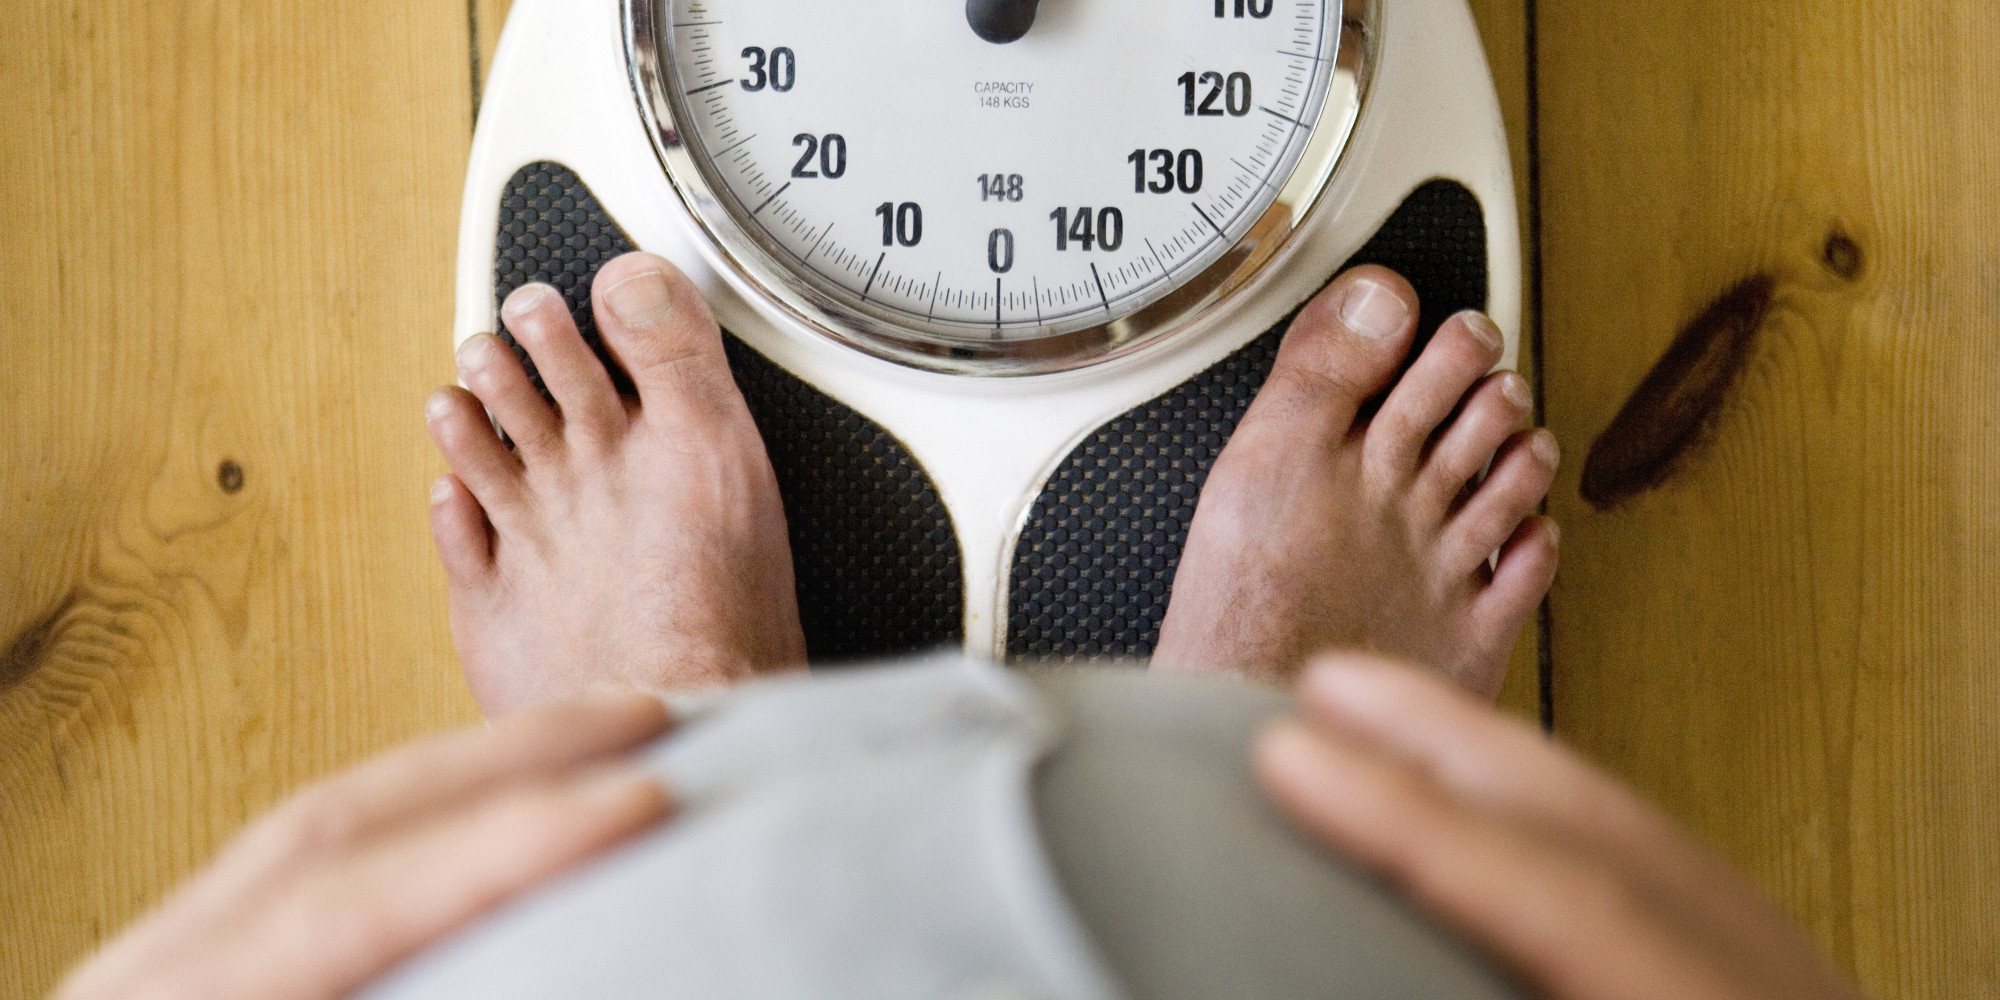 Man holding belly, with feet on weighing scales